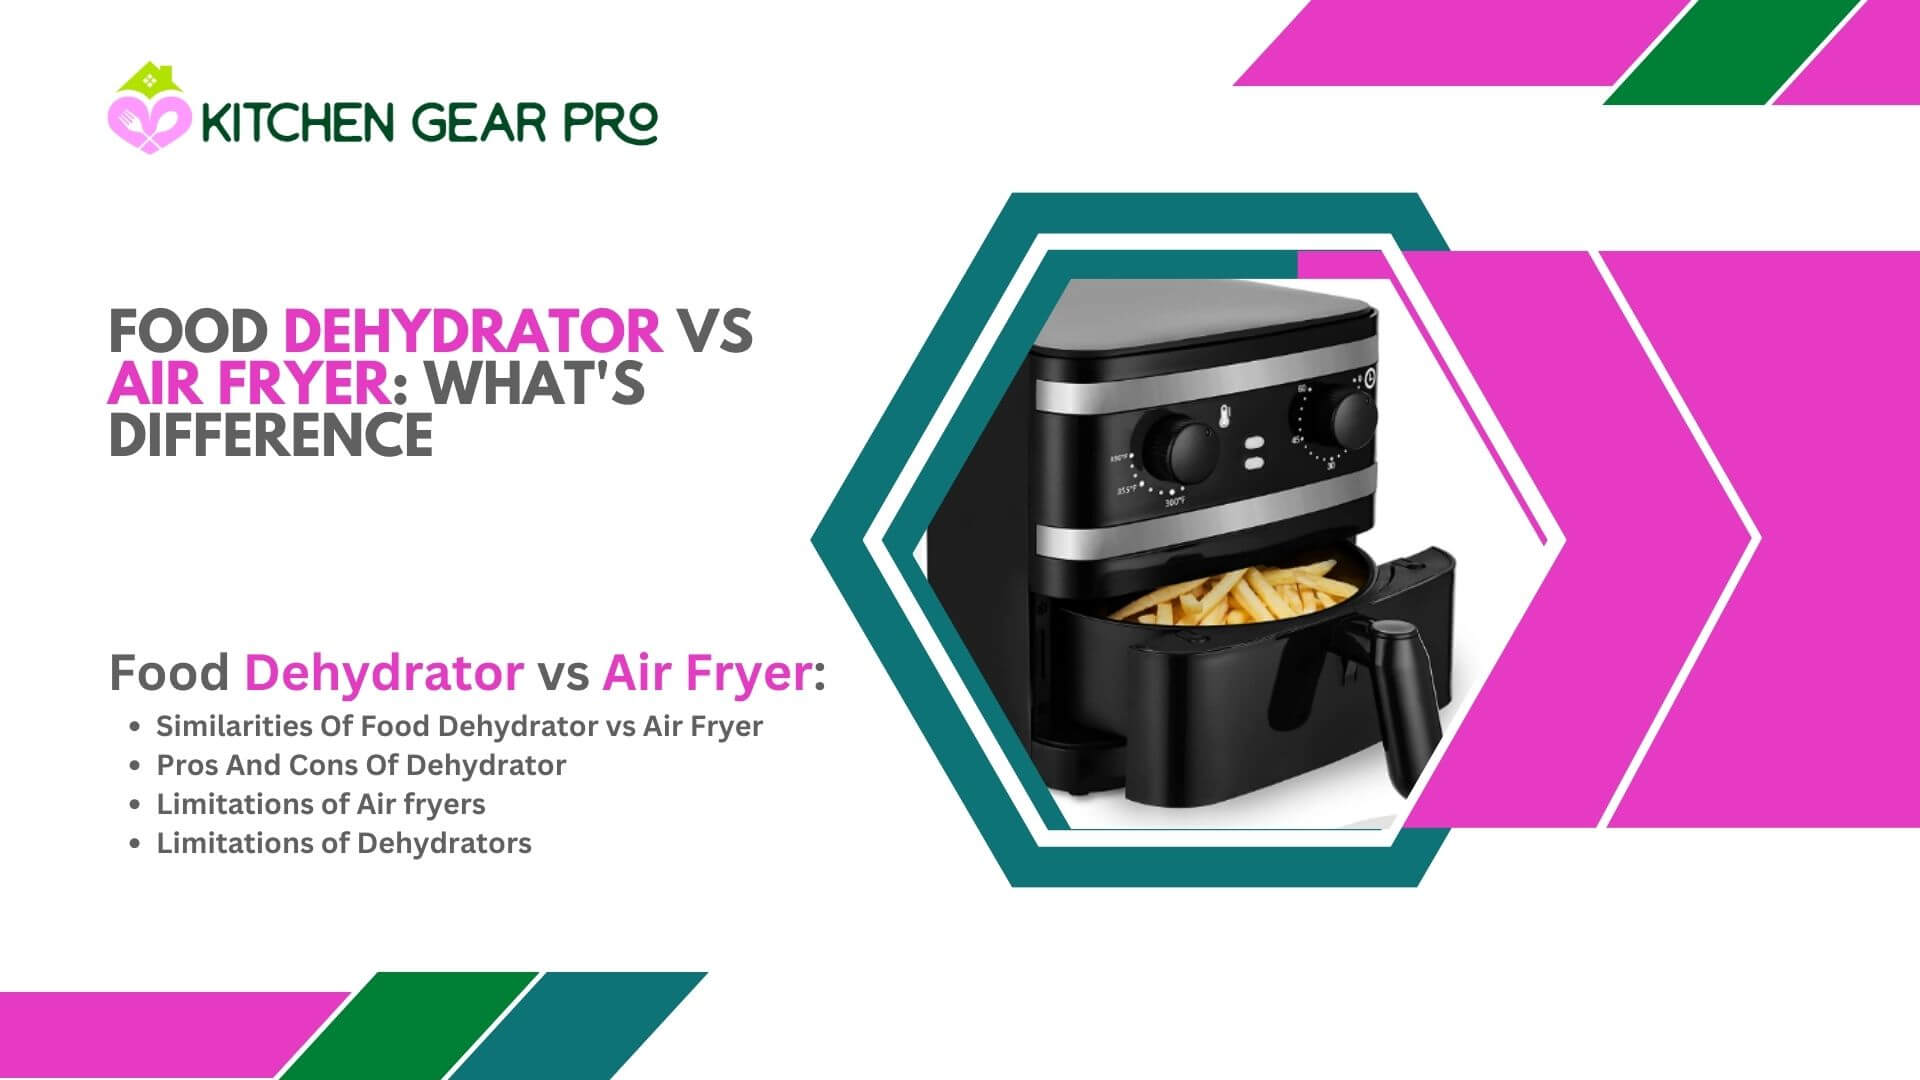 Food Dehydrator vs Air Fryer What's Difference